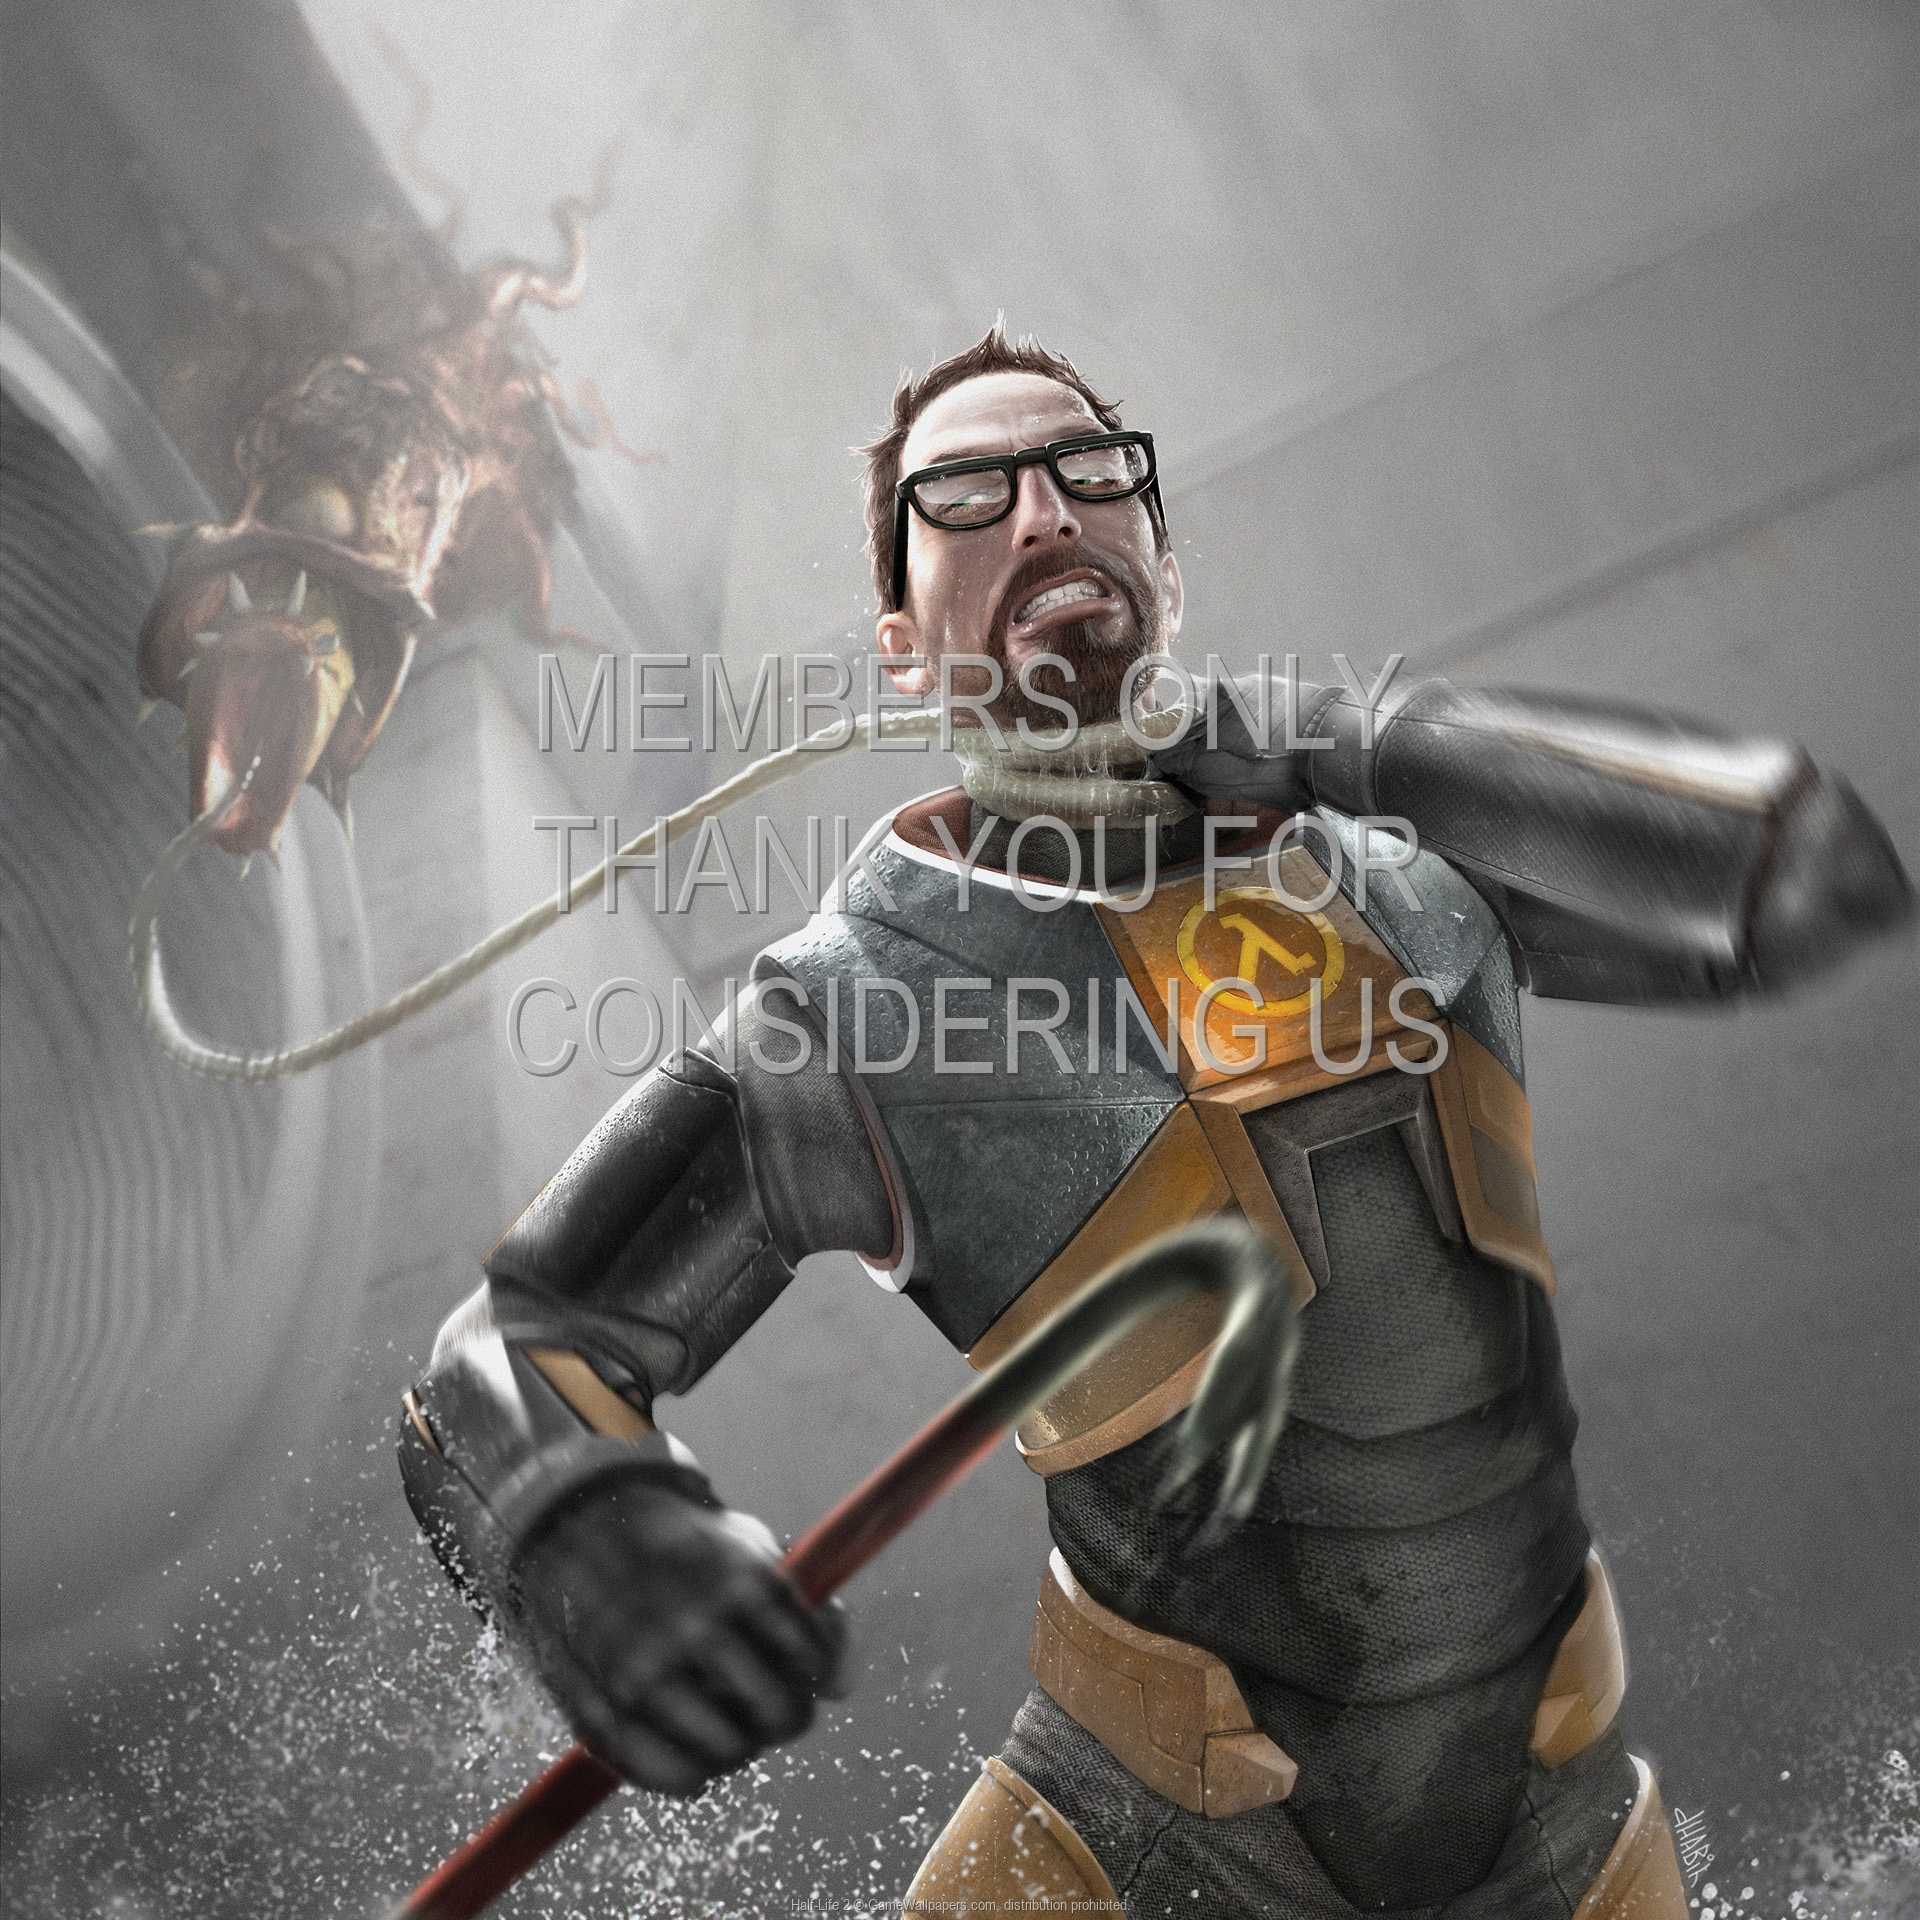 Half Life 2 Wallpaper 14 1080p Horizontal We hope you enjoy our growing collection of hd images to use as a. half life 2 wallpaper 14 1080p horizontal